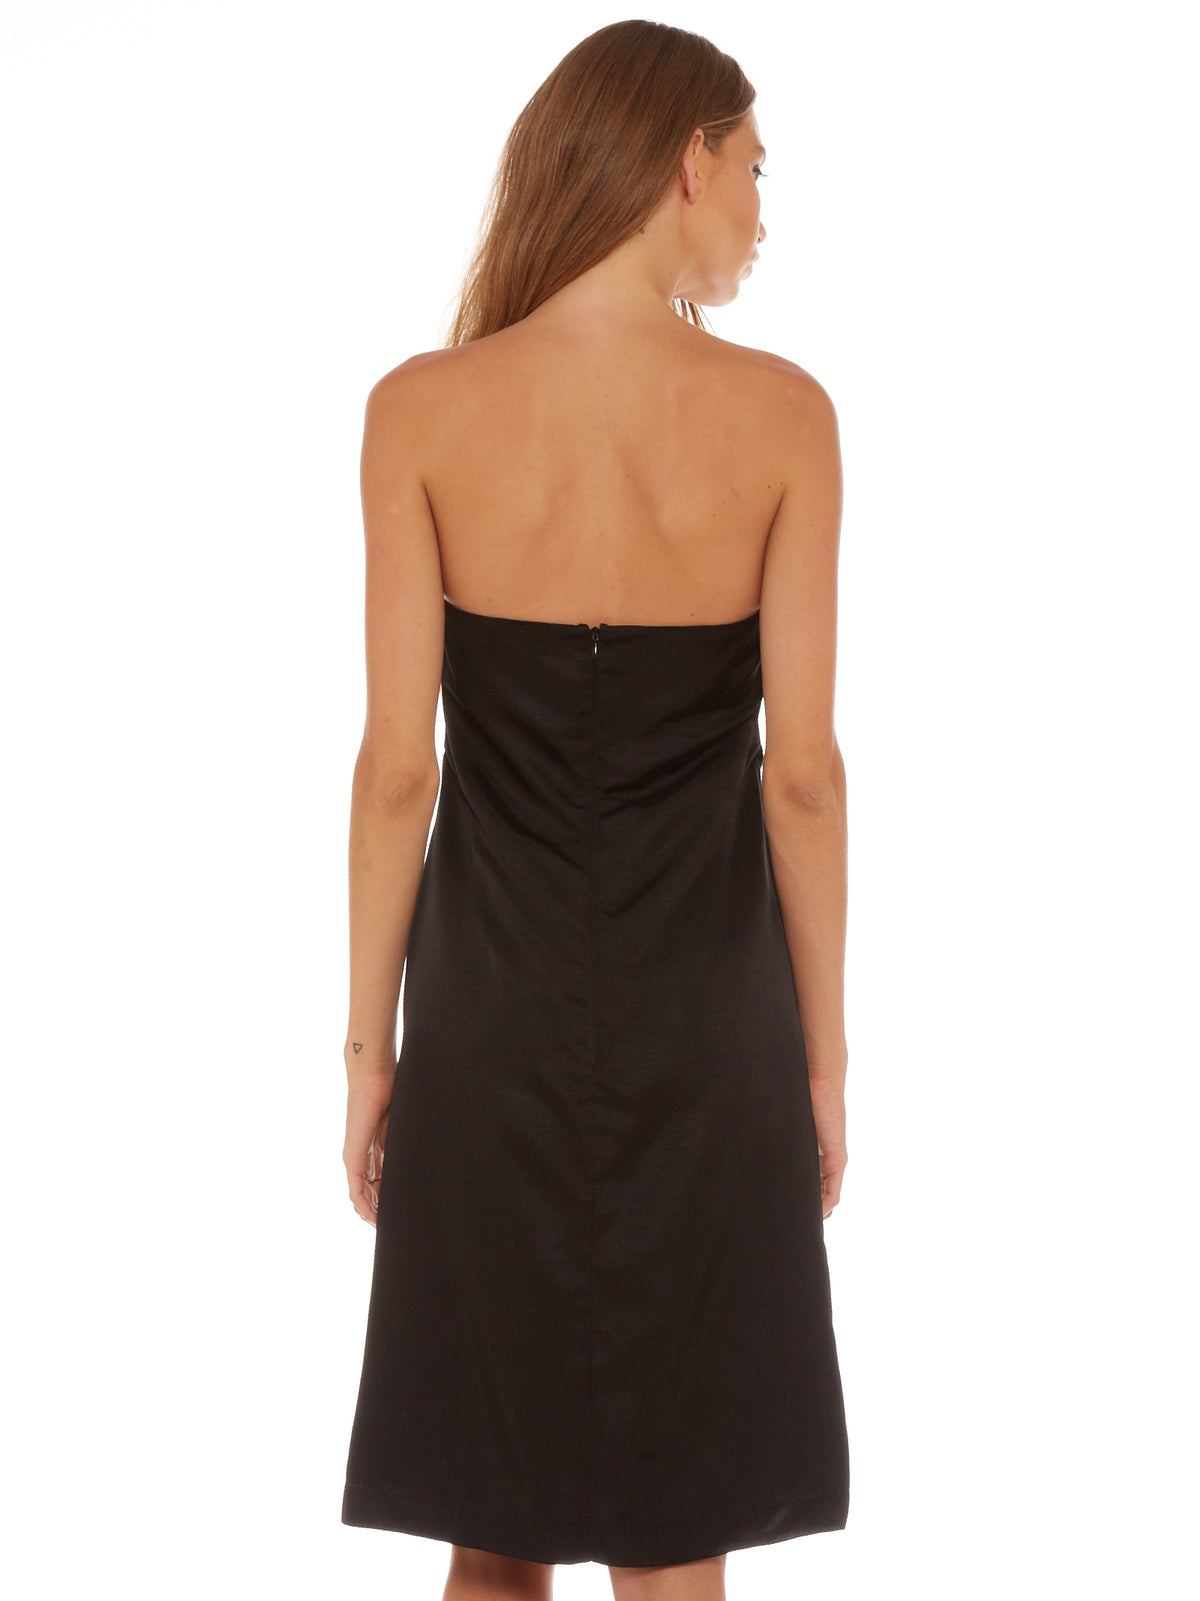 Strapless A-Line Dress in Black